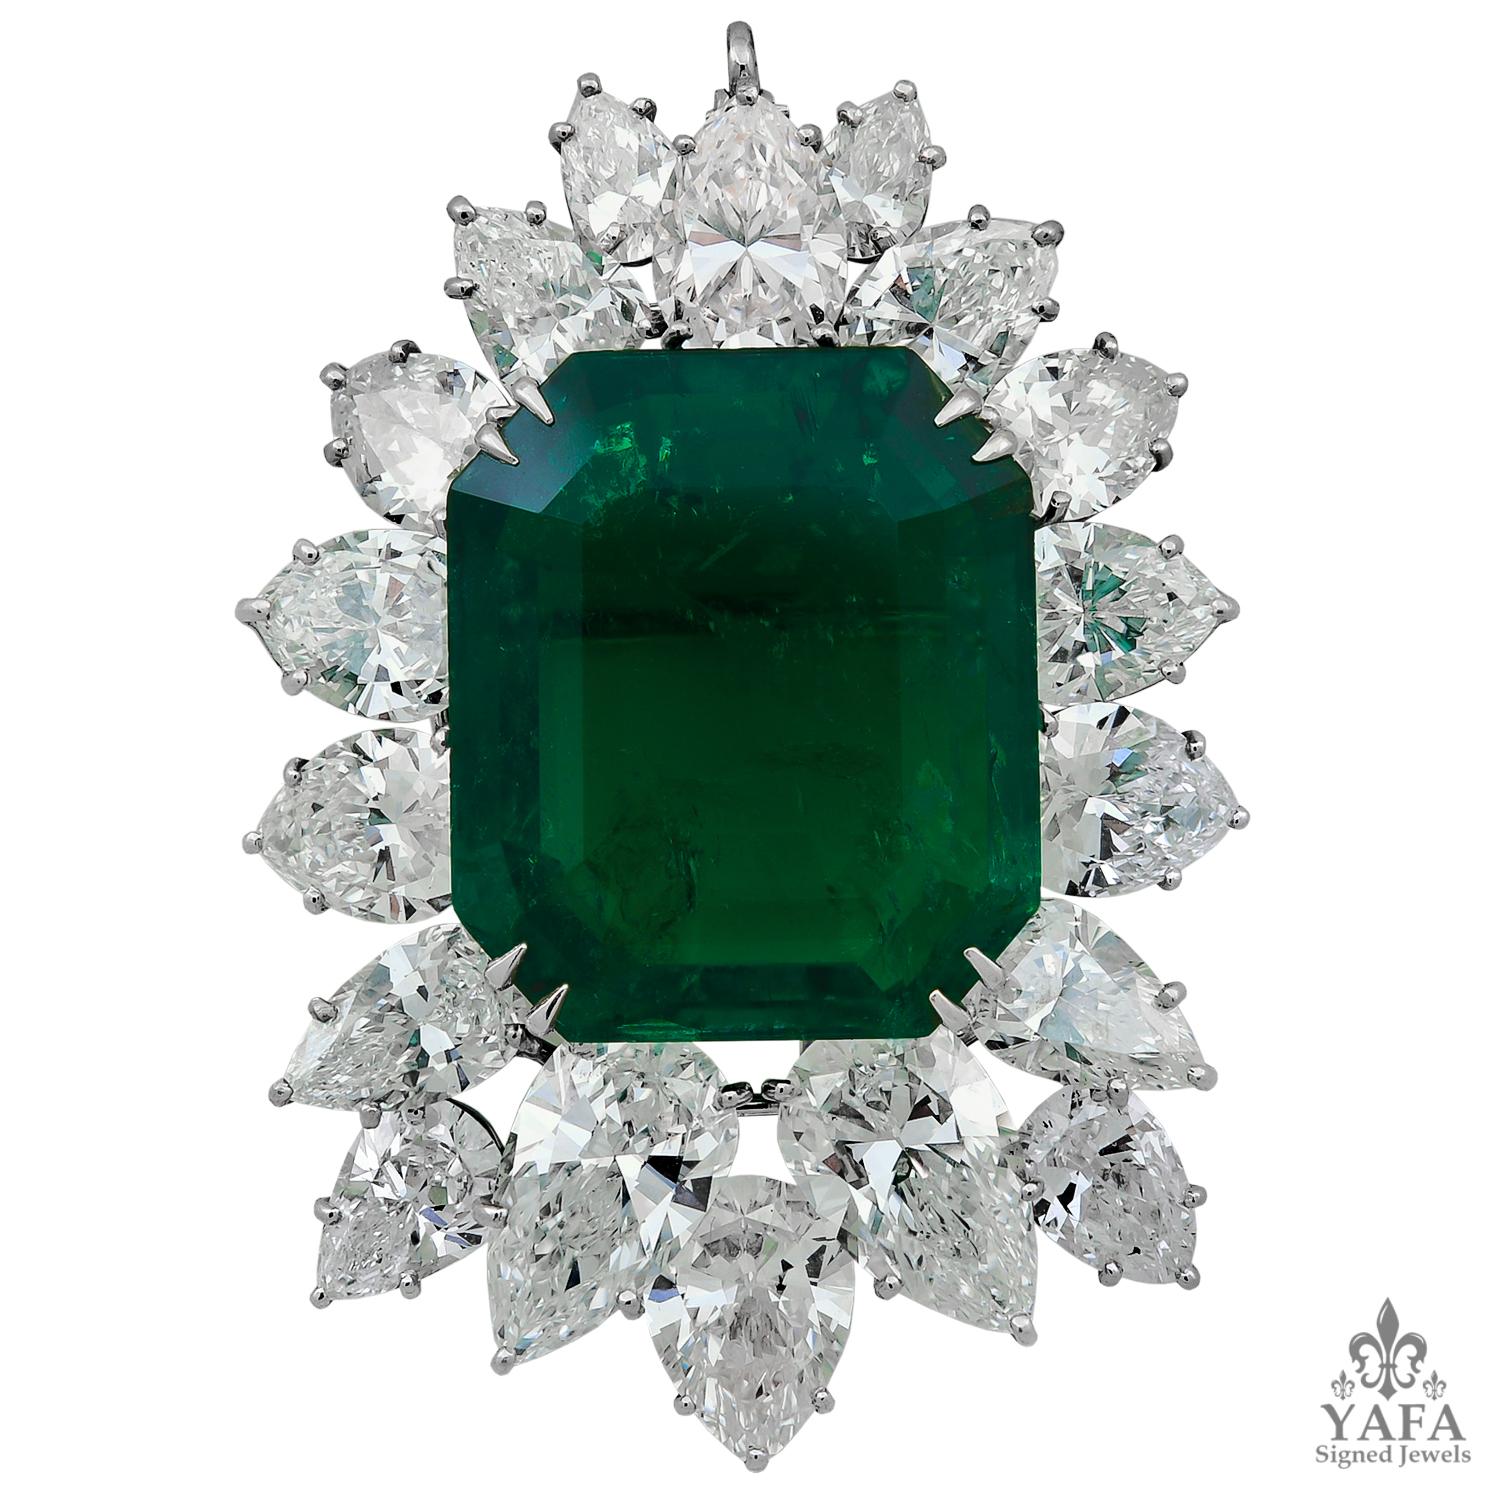 Important Harry Winston Diamond 23 Carat Certified Emerald Pendant Necklace
An 18k gold and platinum detachable pendant necklace, set with diamonds and emerald, signed Harry Winston.
emerald weighing approx. 23 cts. and diamonds 48 cts.